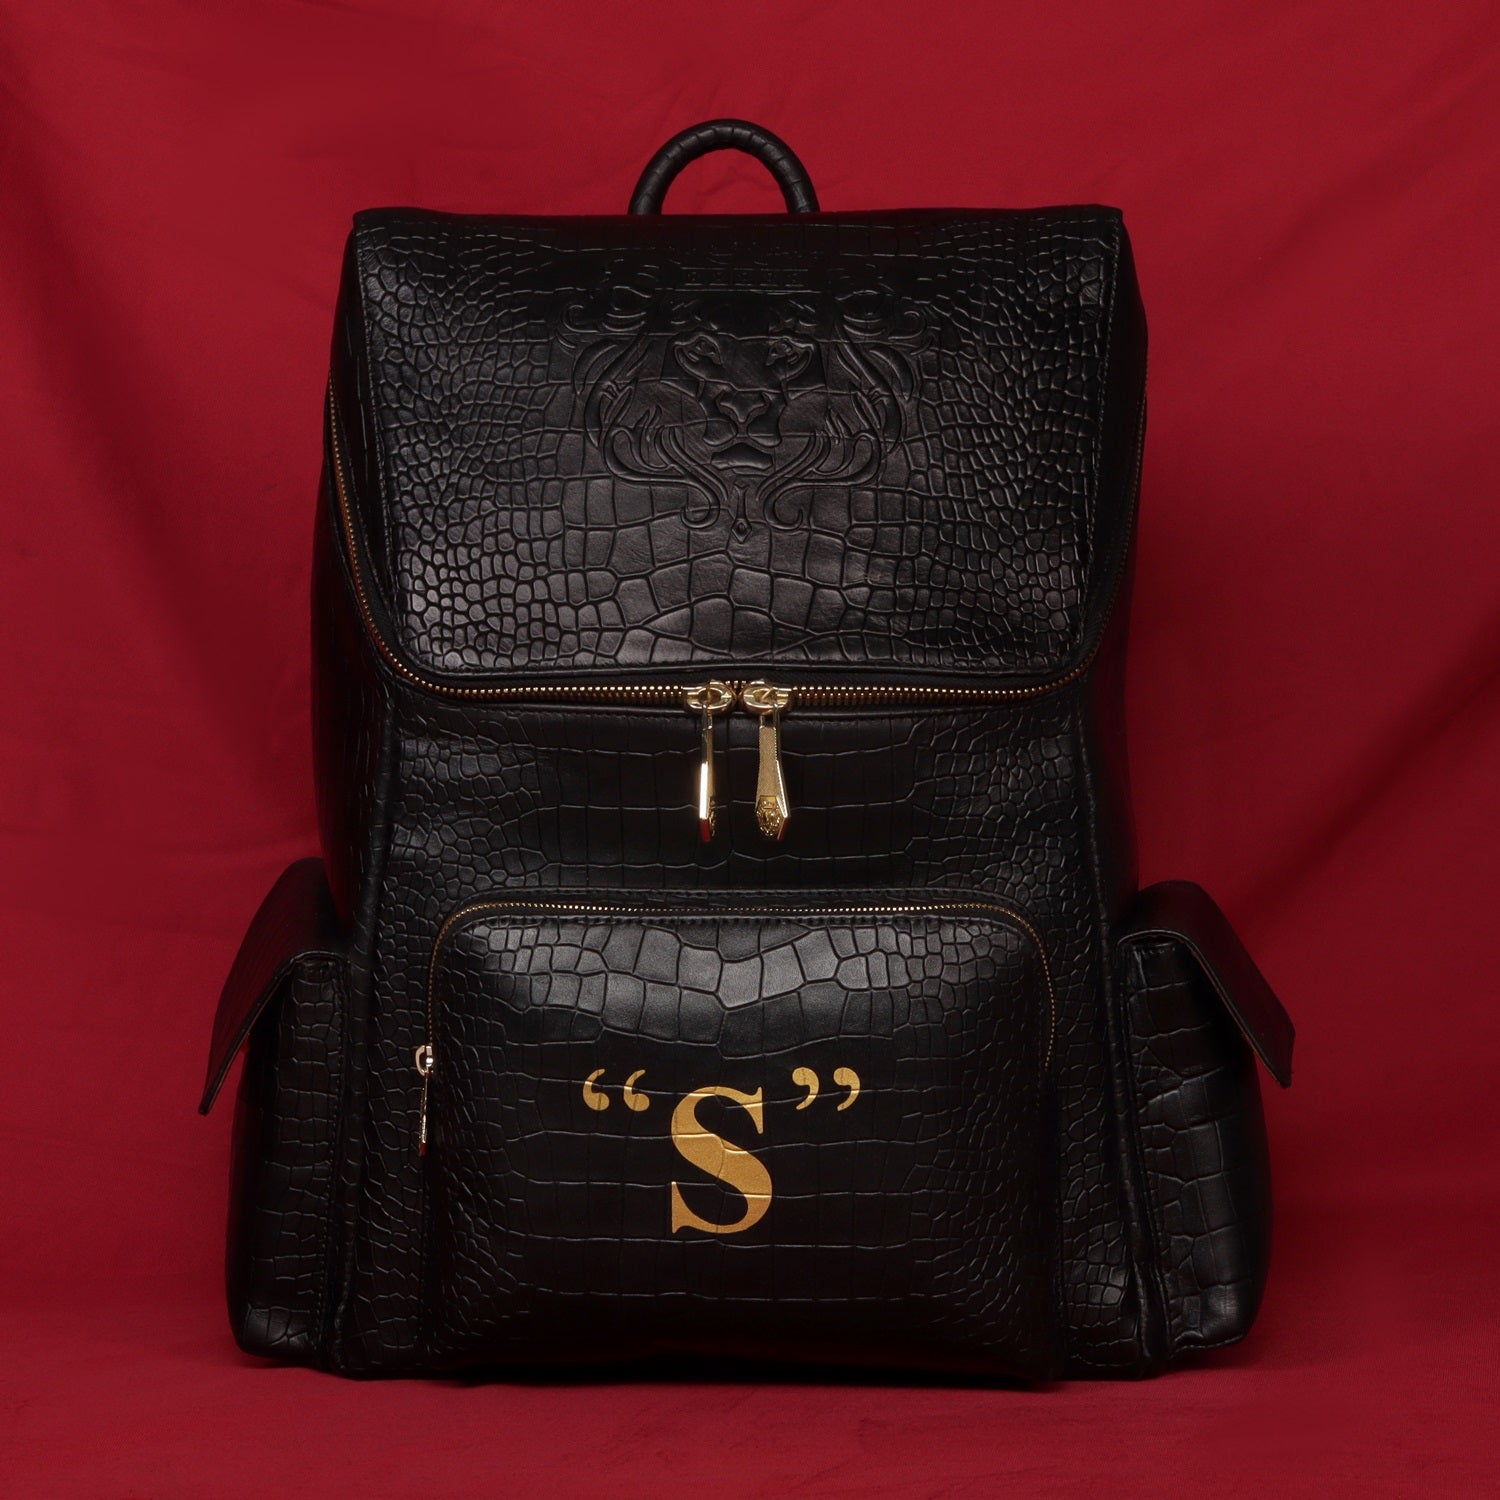 Bespoke "S" Hand-Painted Initial Embossed Lion Top Opening Black Croco Print Leather Backpack By Brune and Bareskin